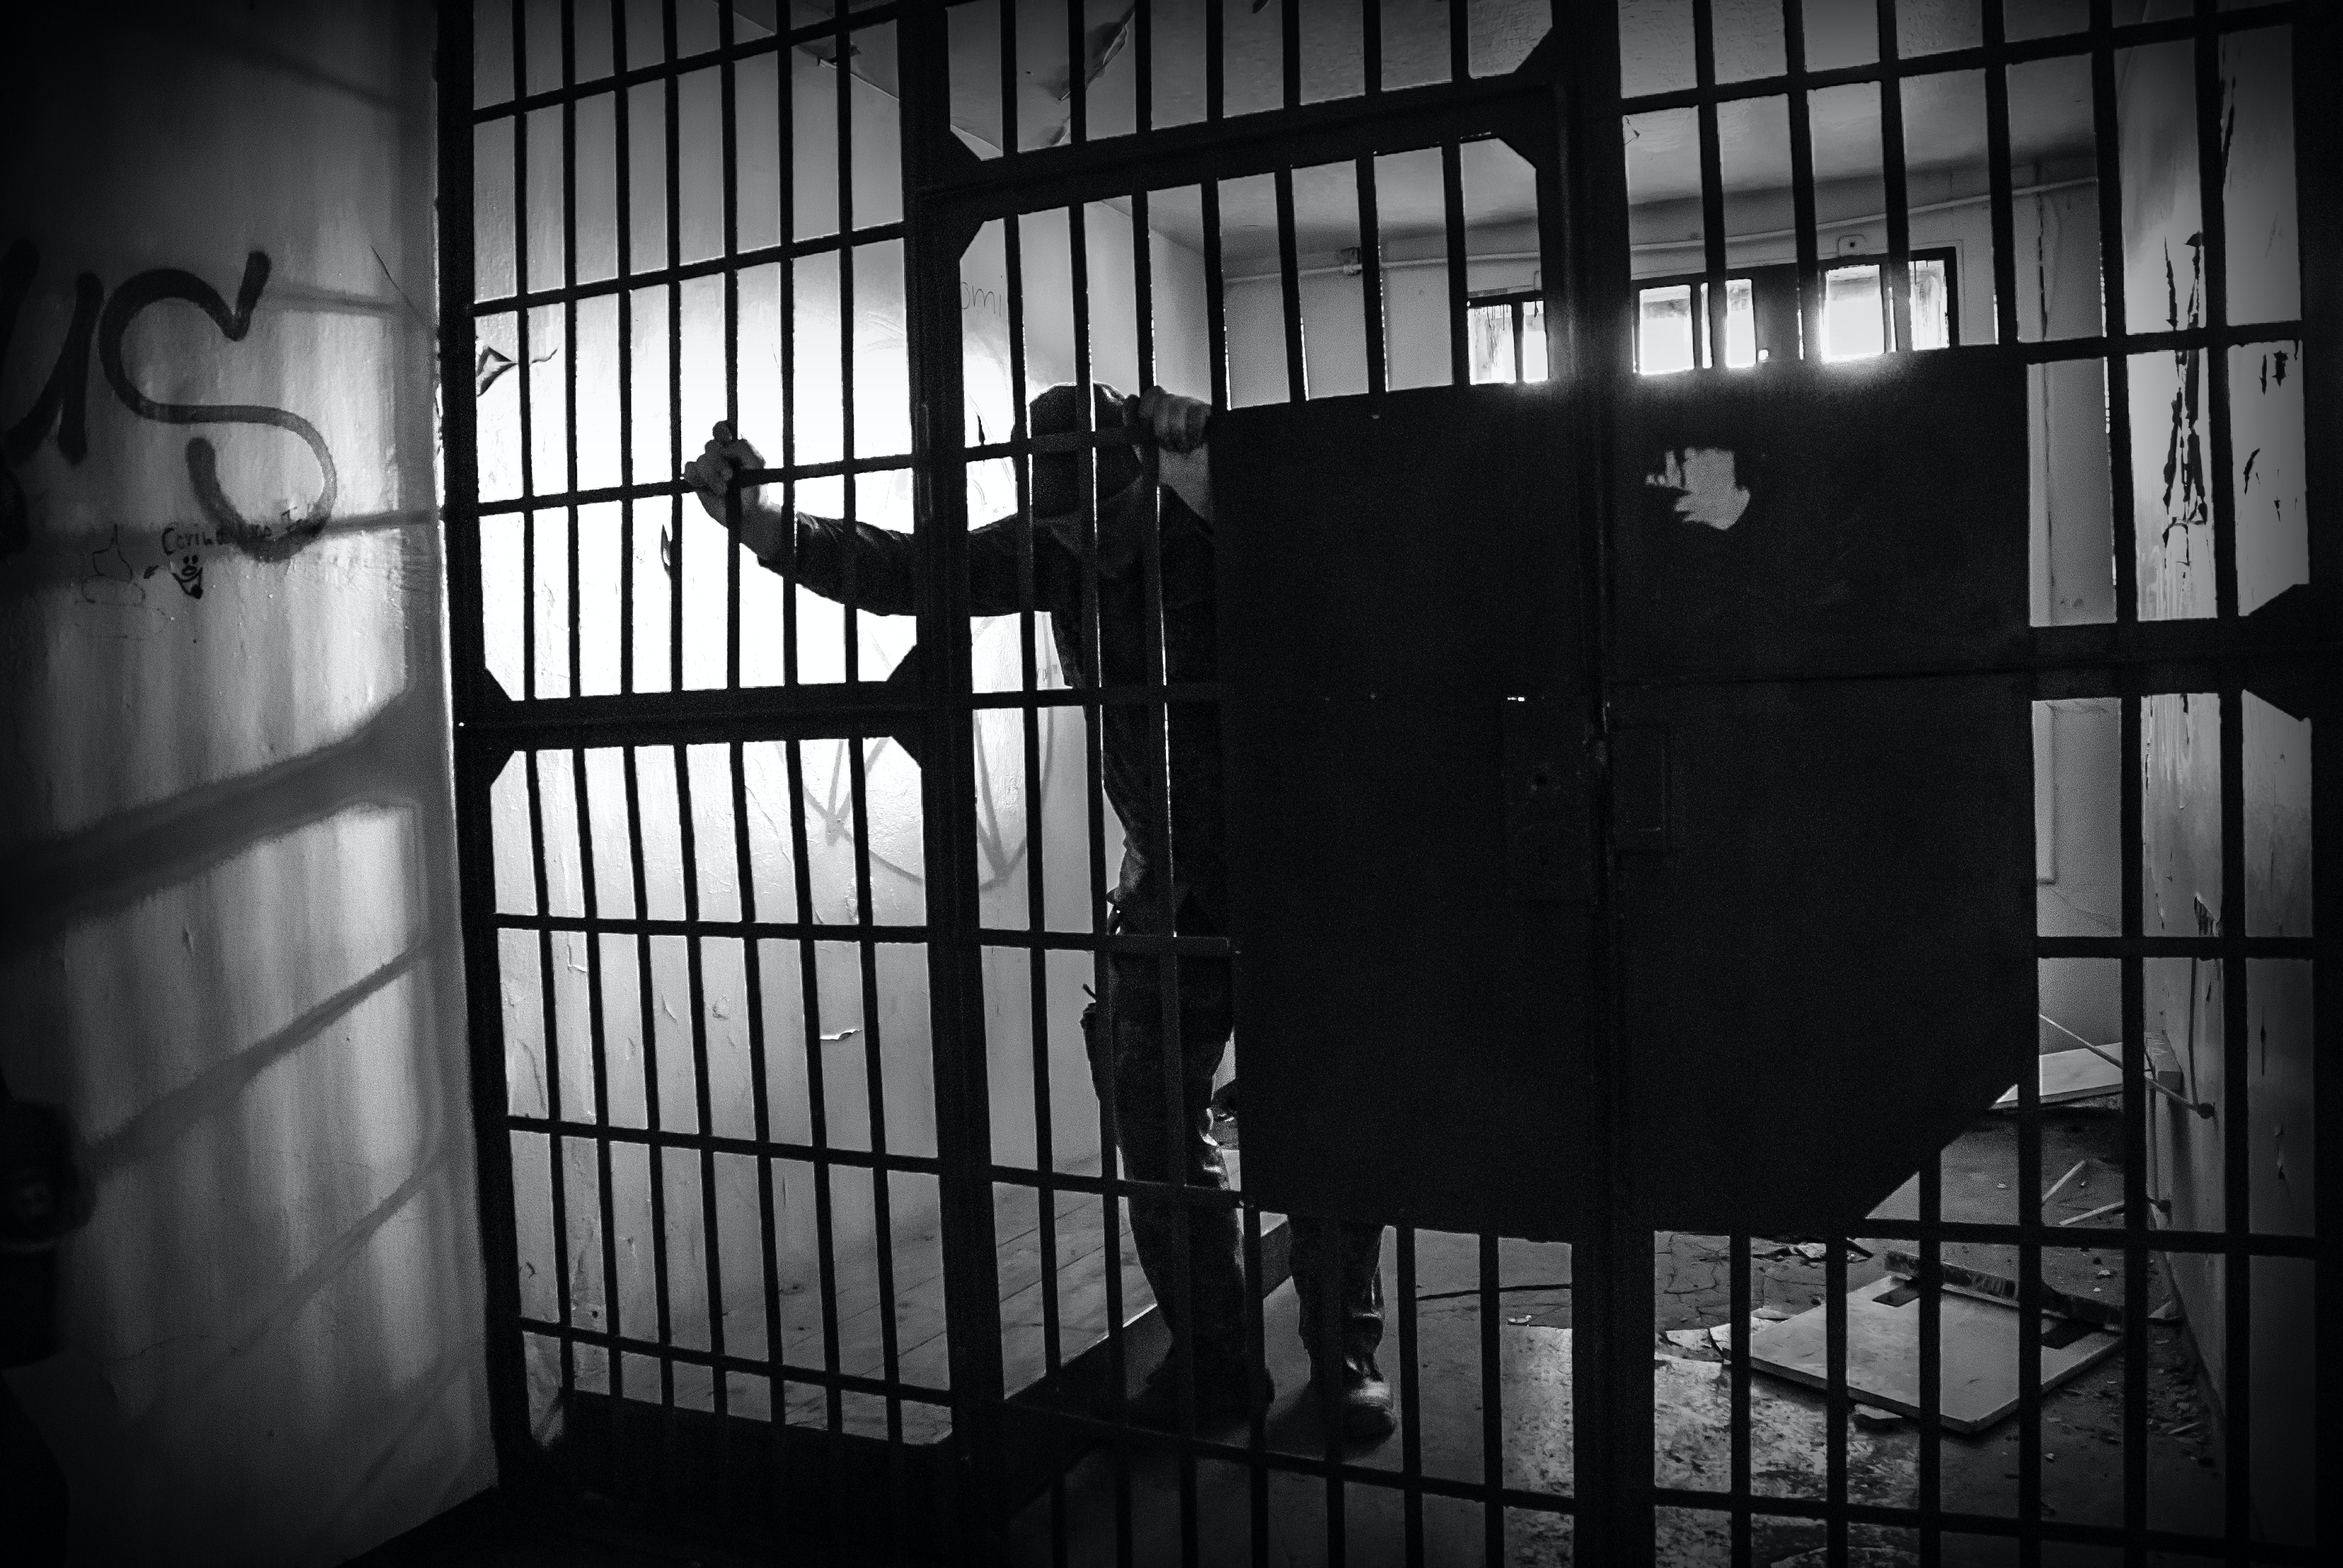 Silhouette of a person behind bars, conveying the stark reality of incarceration, suitable for a blog or article discussing the severe implications of criminal convictions in Arizona.